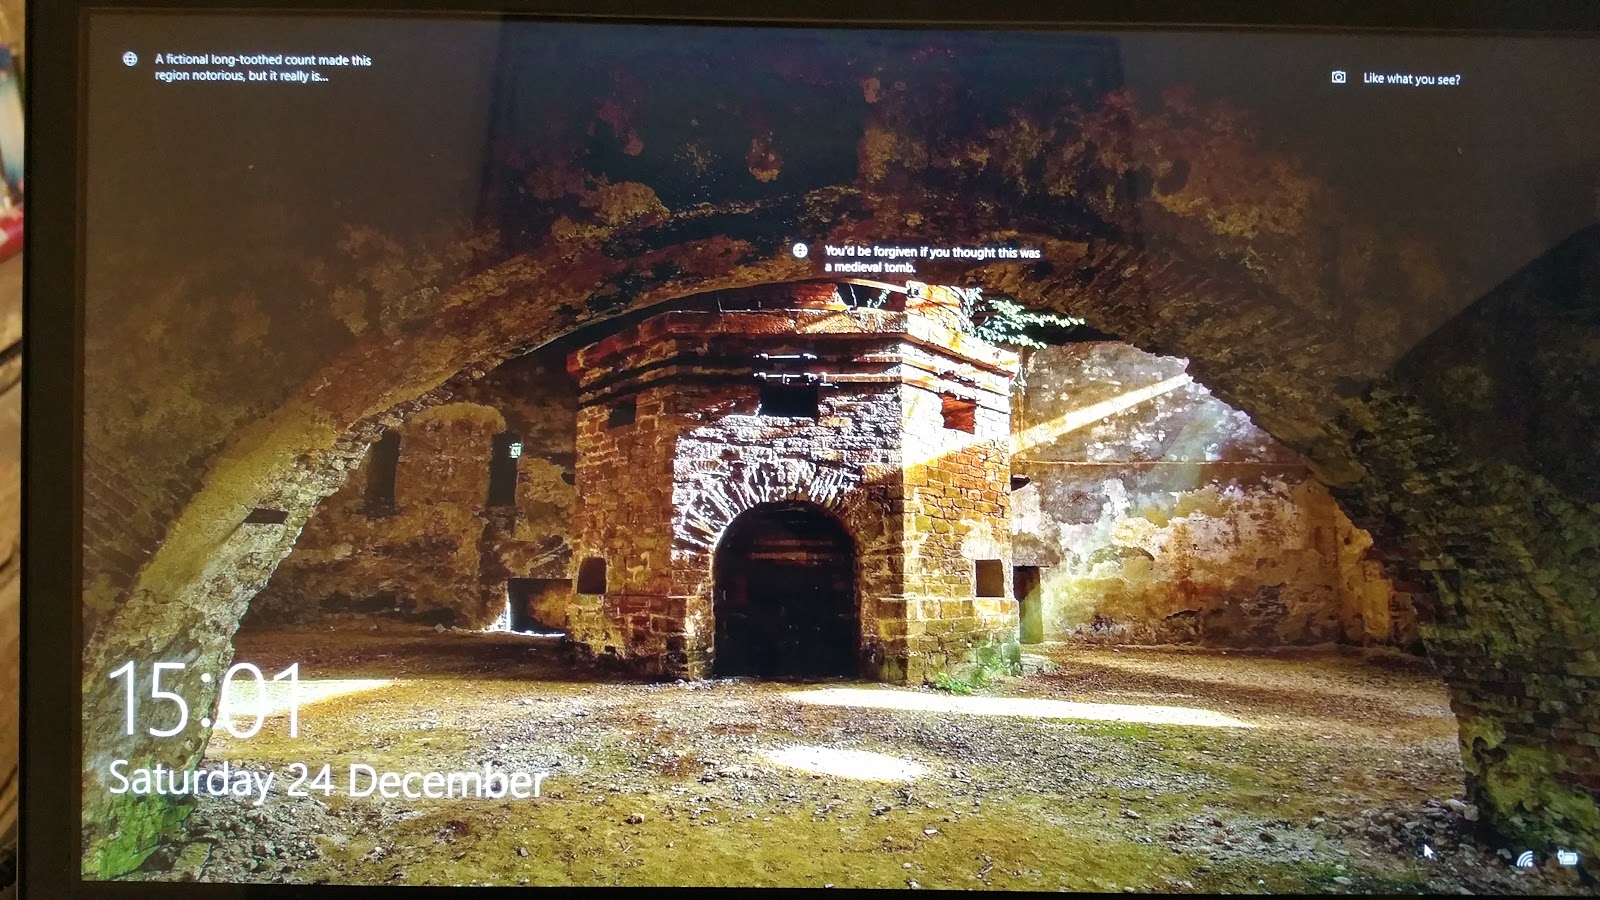 IMHO: Can I steal Windows 10 lock screen images to use as screen